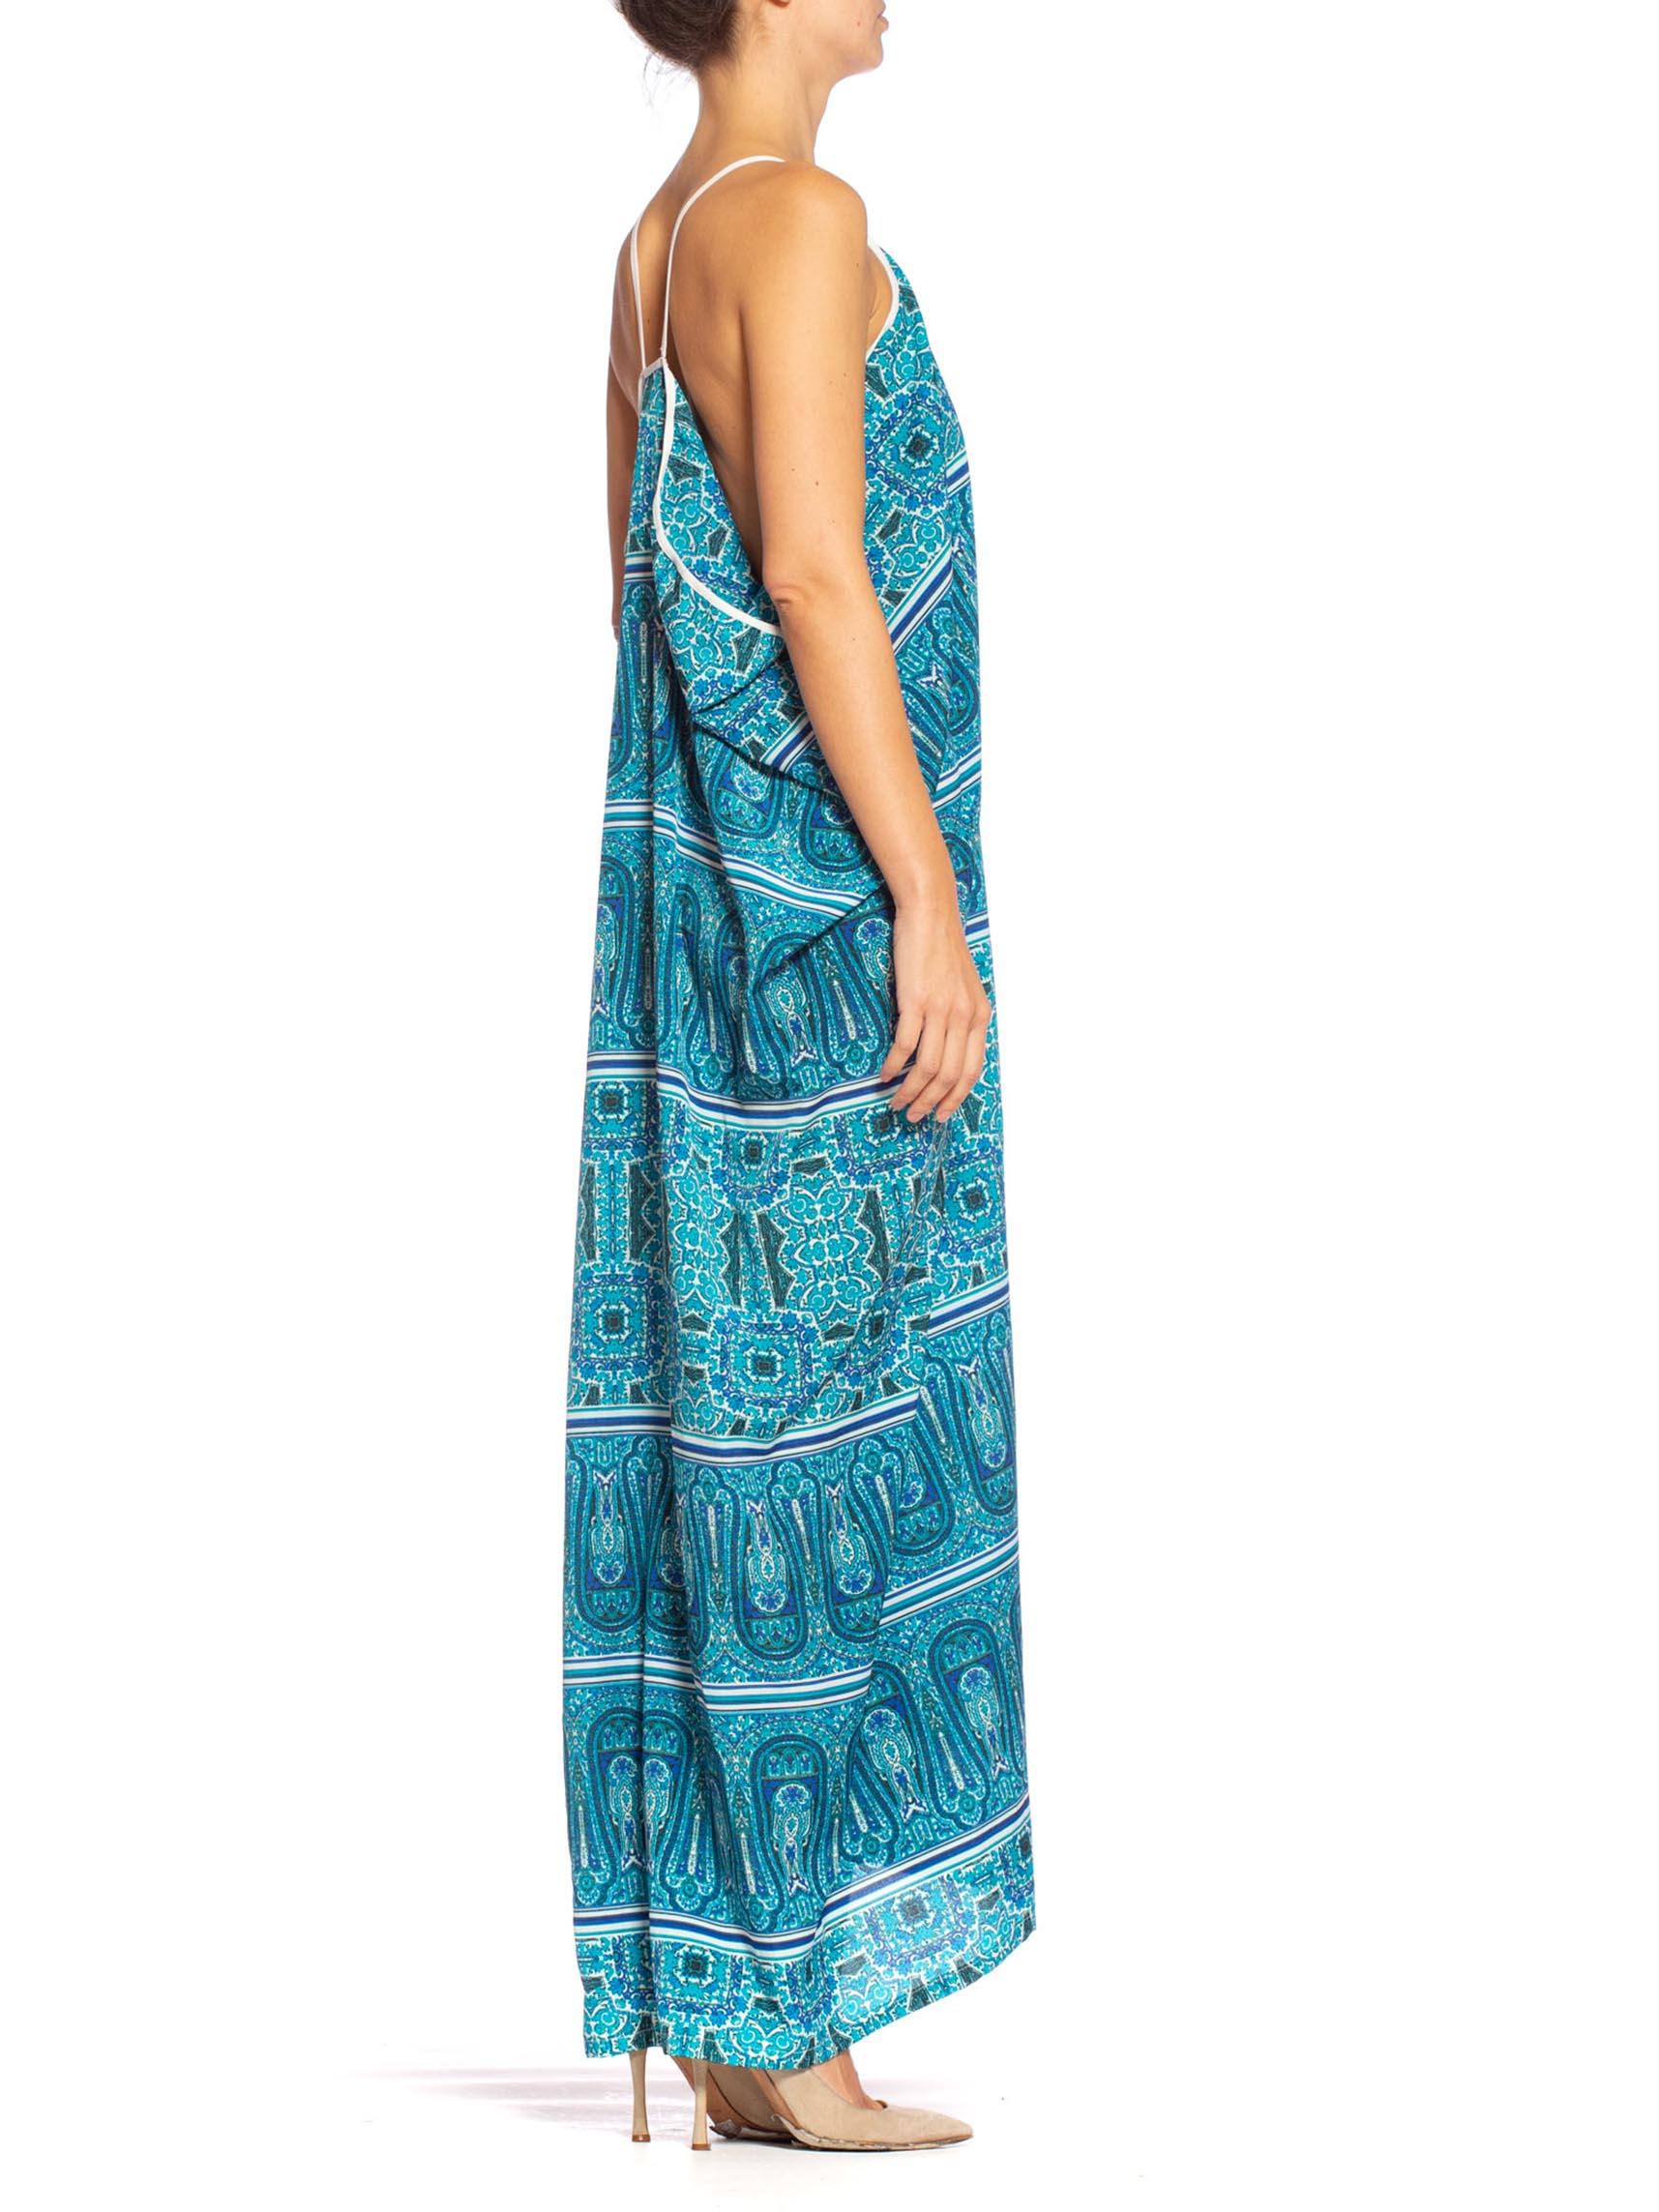 MORPHEW COLLECTION Teal Paisley Poly Blend Easy Breezy Everbody Maxi Dress Made 2